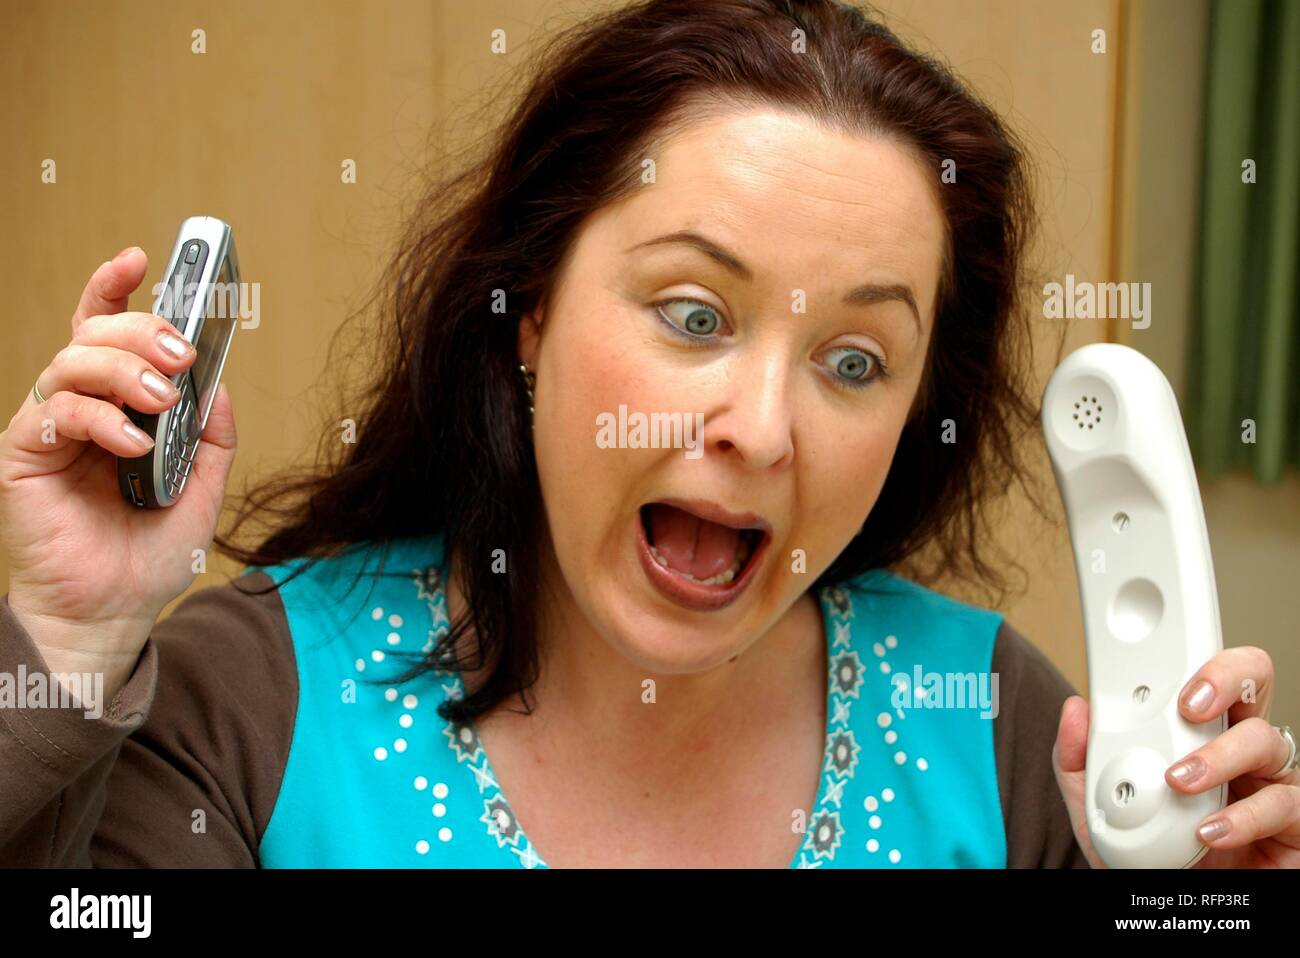 Stressed woman with telephones Stock Photo